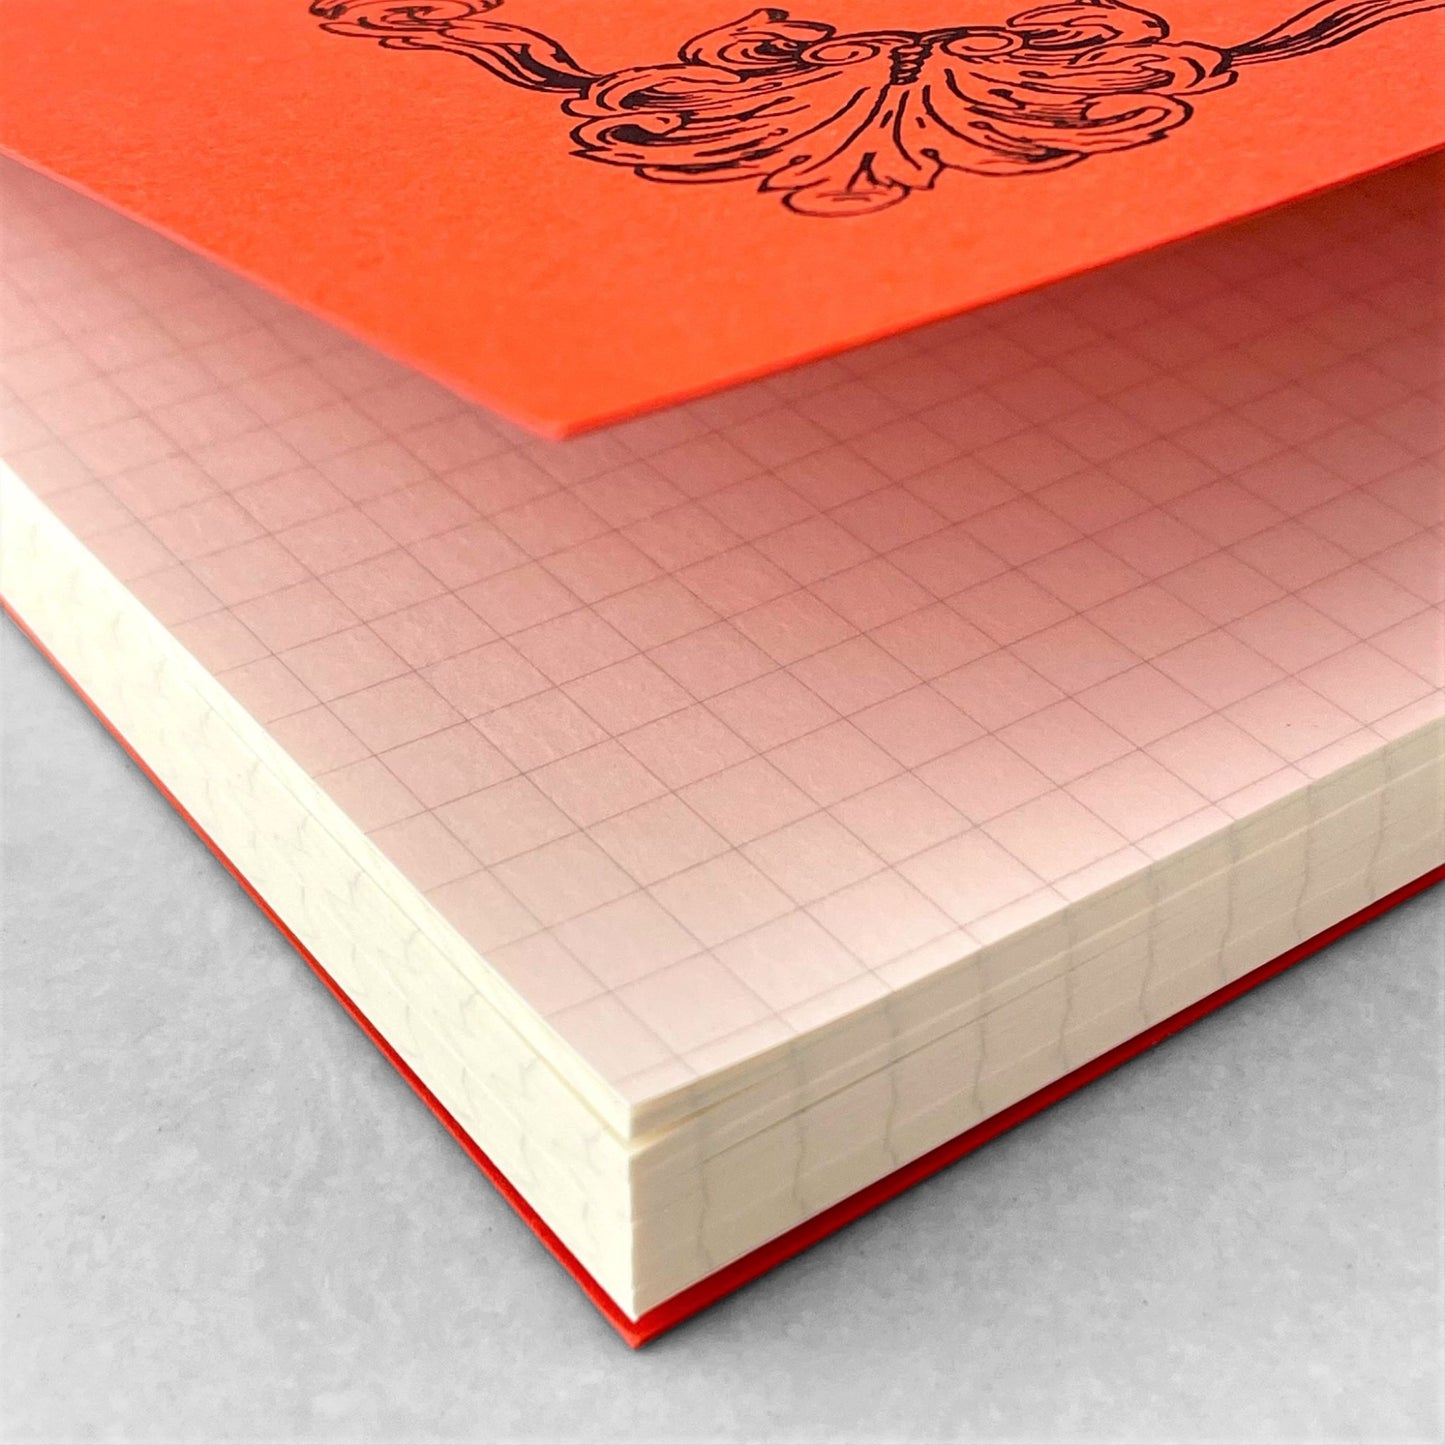 Softcover notebook with grid pages. The cover is plain red with a decorative black border and branding. Life Noble range by Japanese brand Life